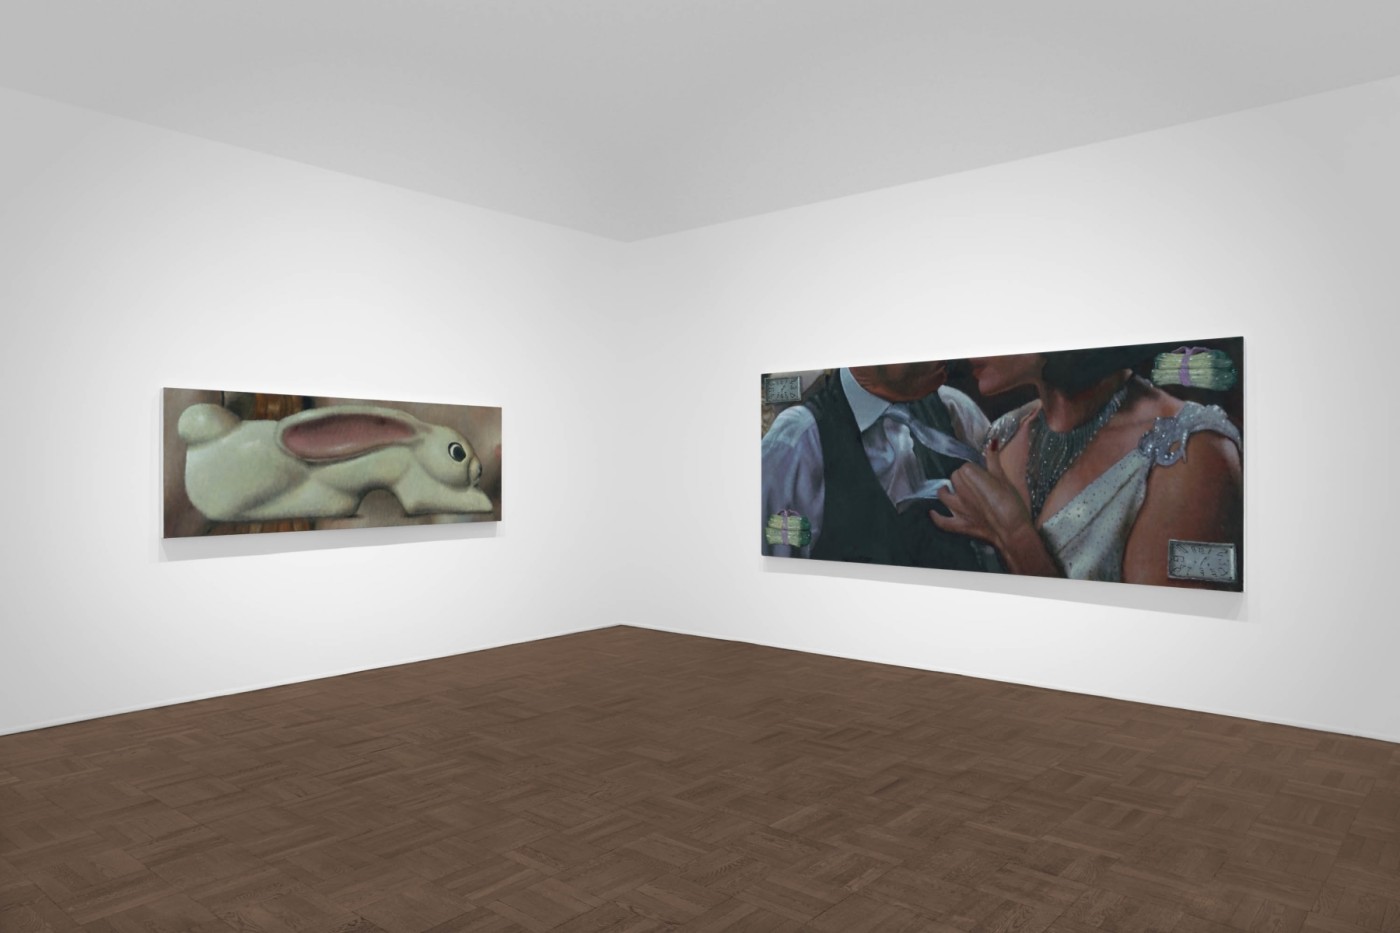 Installation image for Issy Wood: Time Sensitive, at Michael Werner Gallery